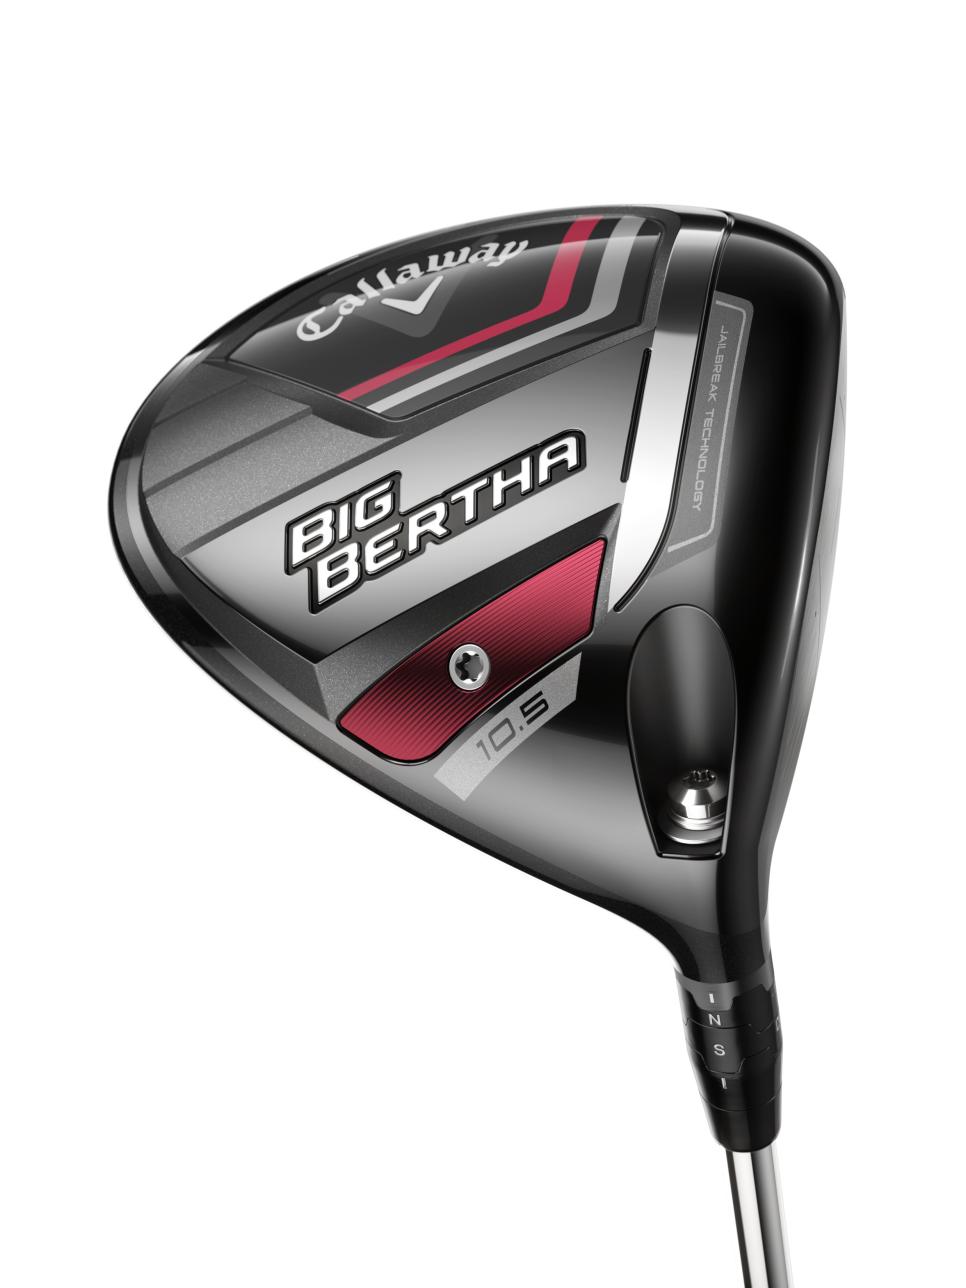 Callaway Big Bertha driver, fairway woods, hybrids, irons: What you need to  know | Golf News and Tour Information | GolfDigest.com